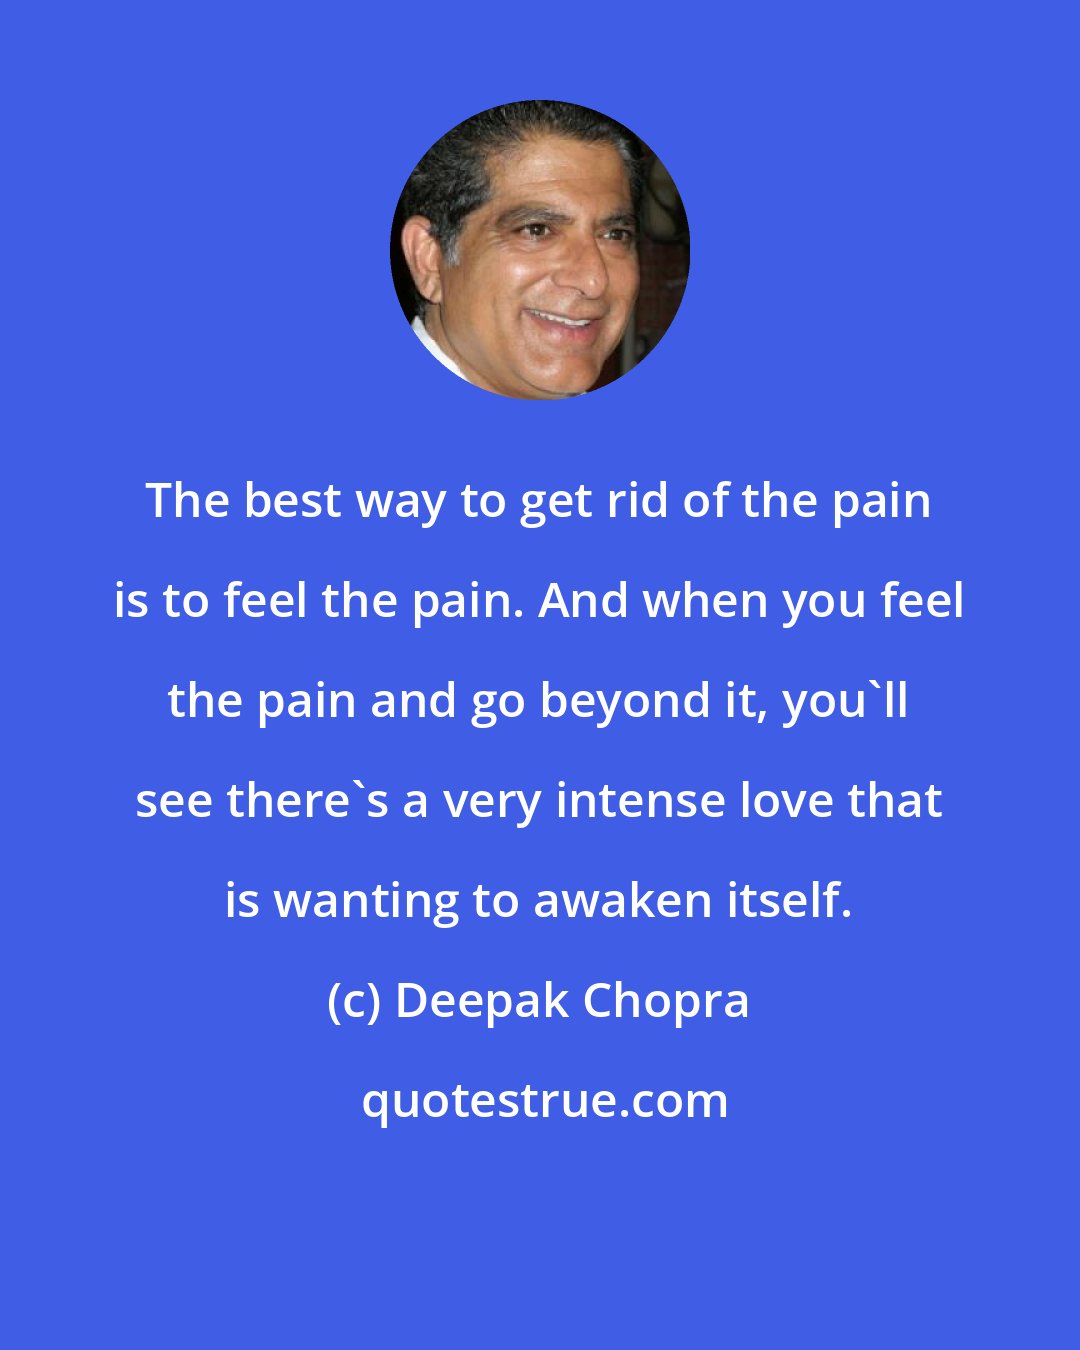 Deepak Chopra: The best way to get rid of the pain is to feel the pain. And when you feel the pain and go beyond it, you'll see there's a very intense love that is wanting to awaken itself.